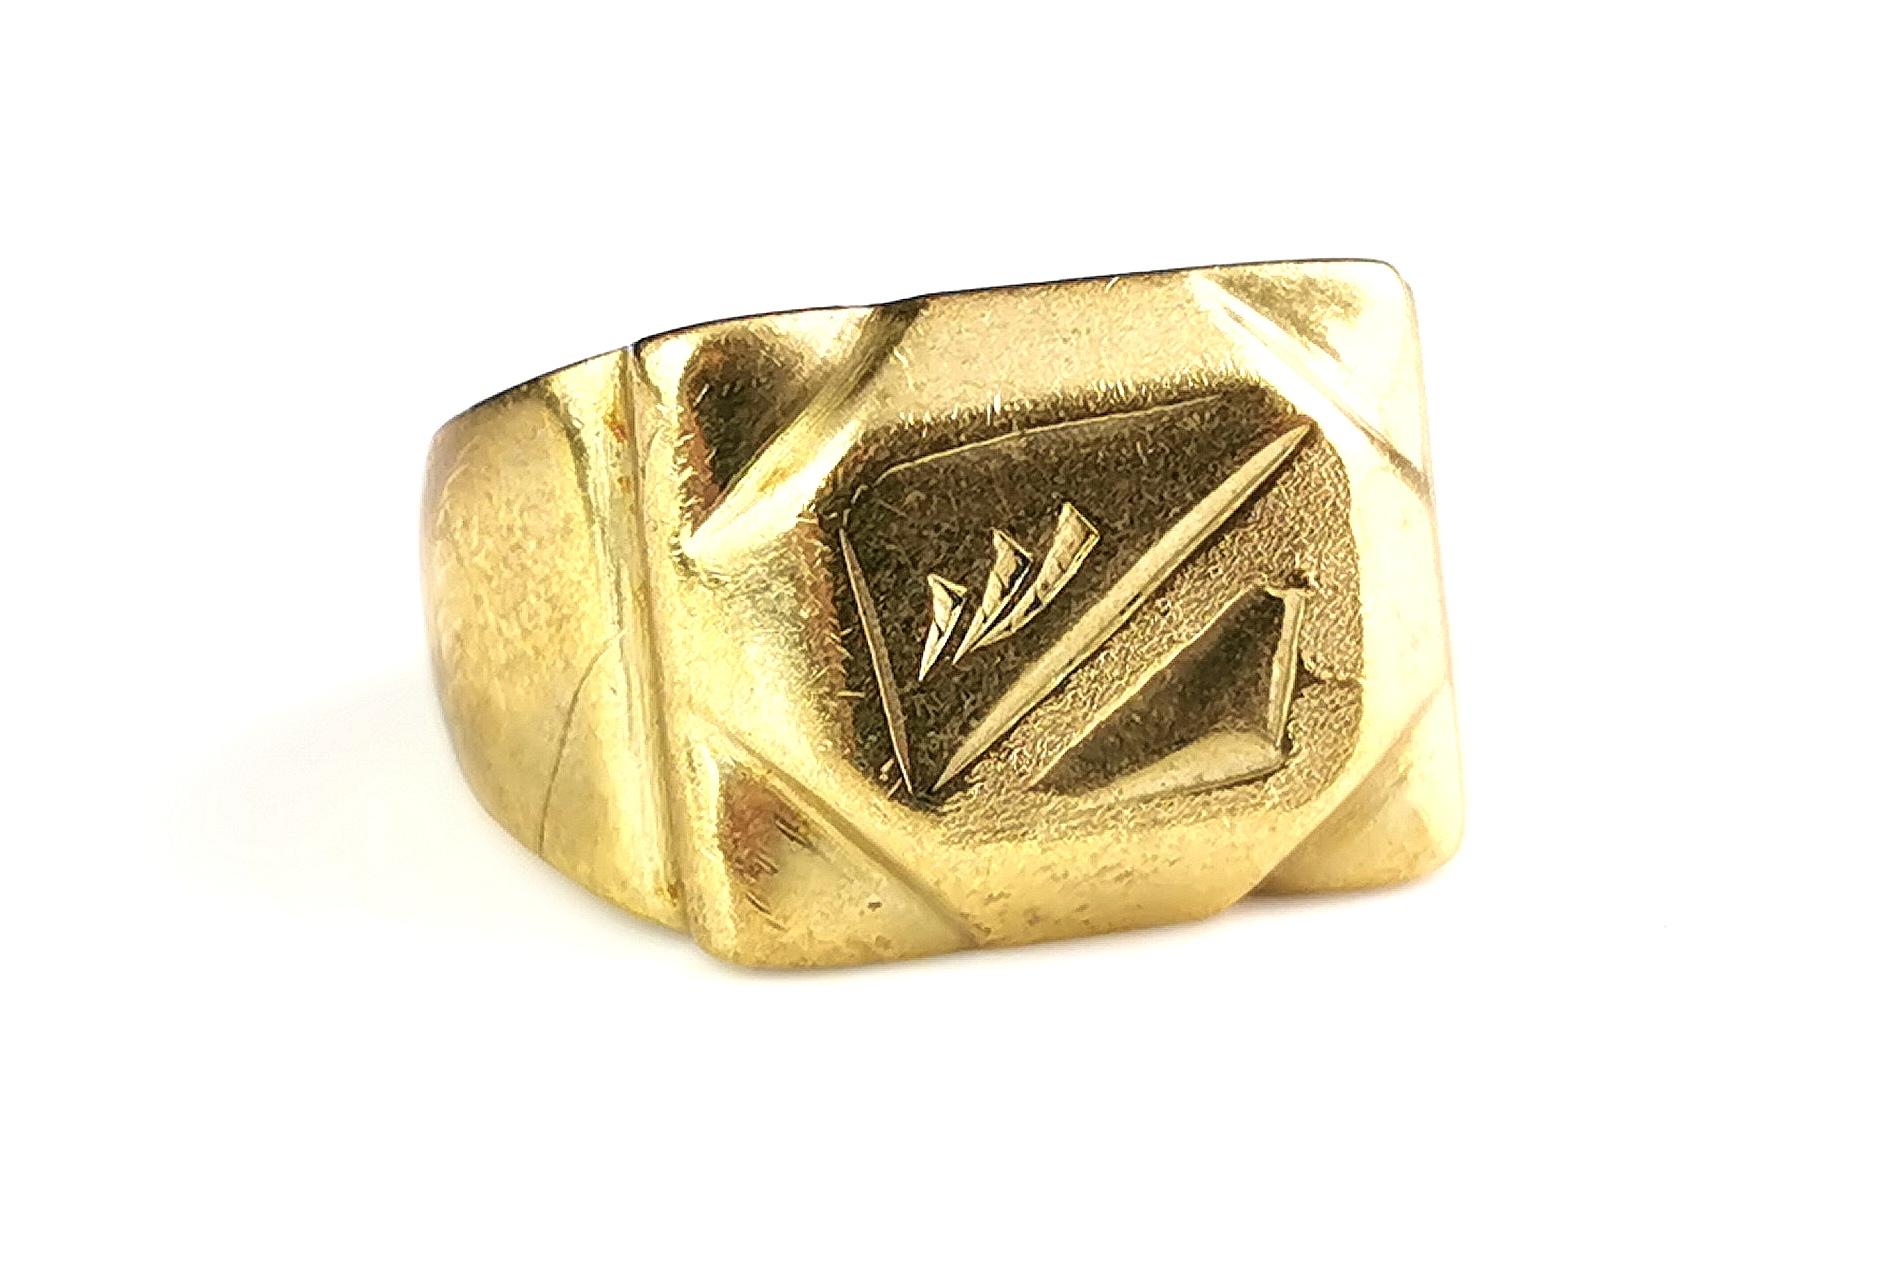 A fantastic vintage c1970s gold plated signet ring.

All the chunky and heavy features of a gold signet ring in a rich 18ct gold plating.

It has a decorative engraving to the front and slight engraved recess to the shoulders.

It is very heavy so